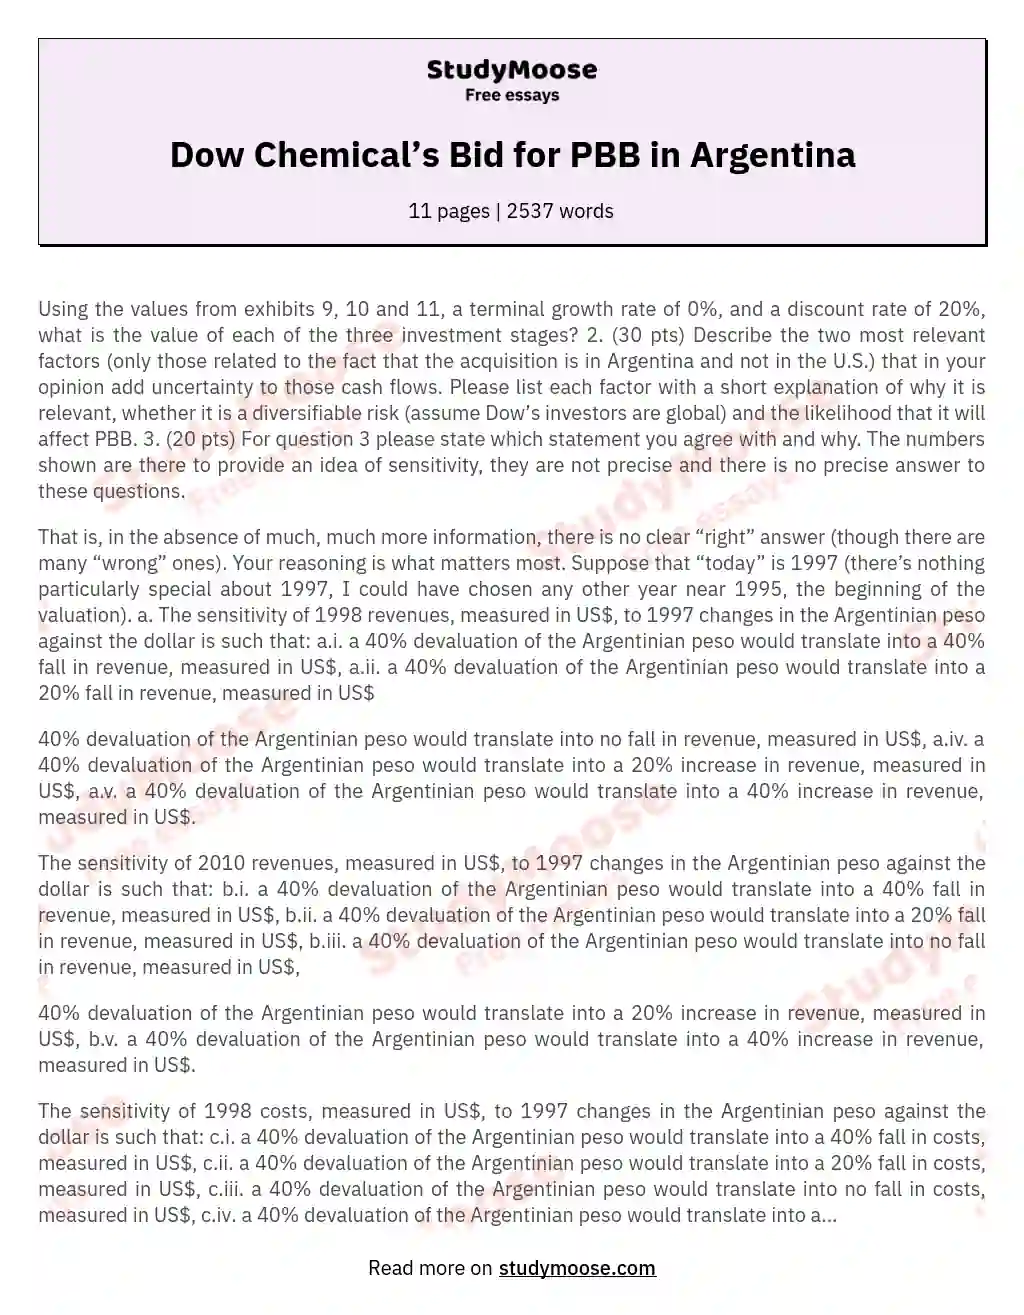 Dow Chemical’s Bid for PBB in Argentina essay